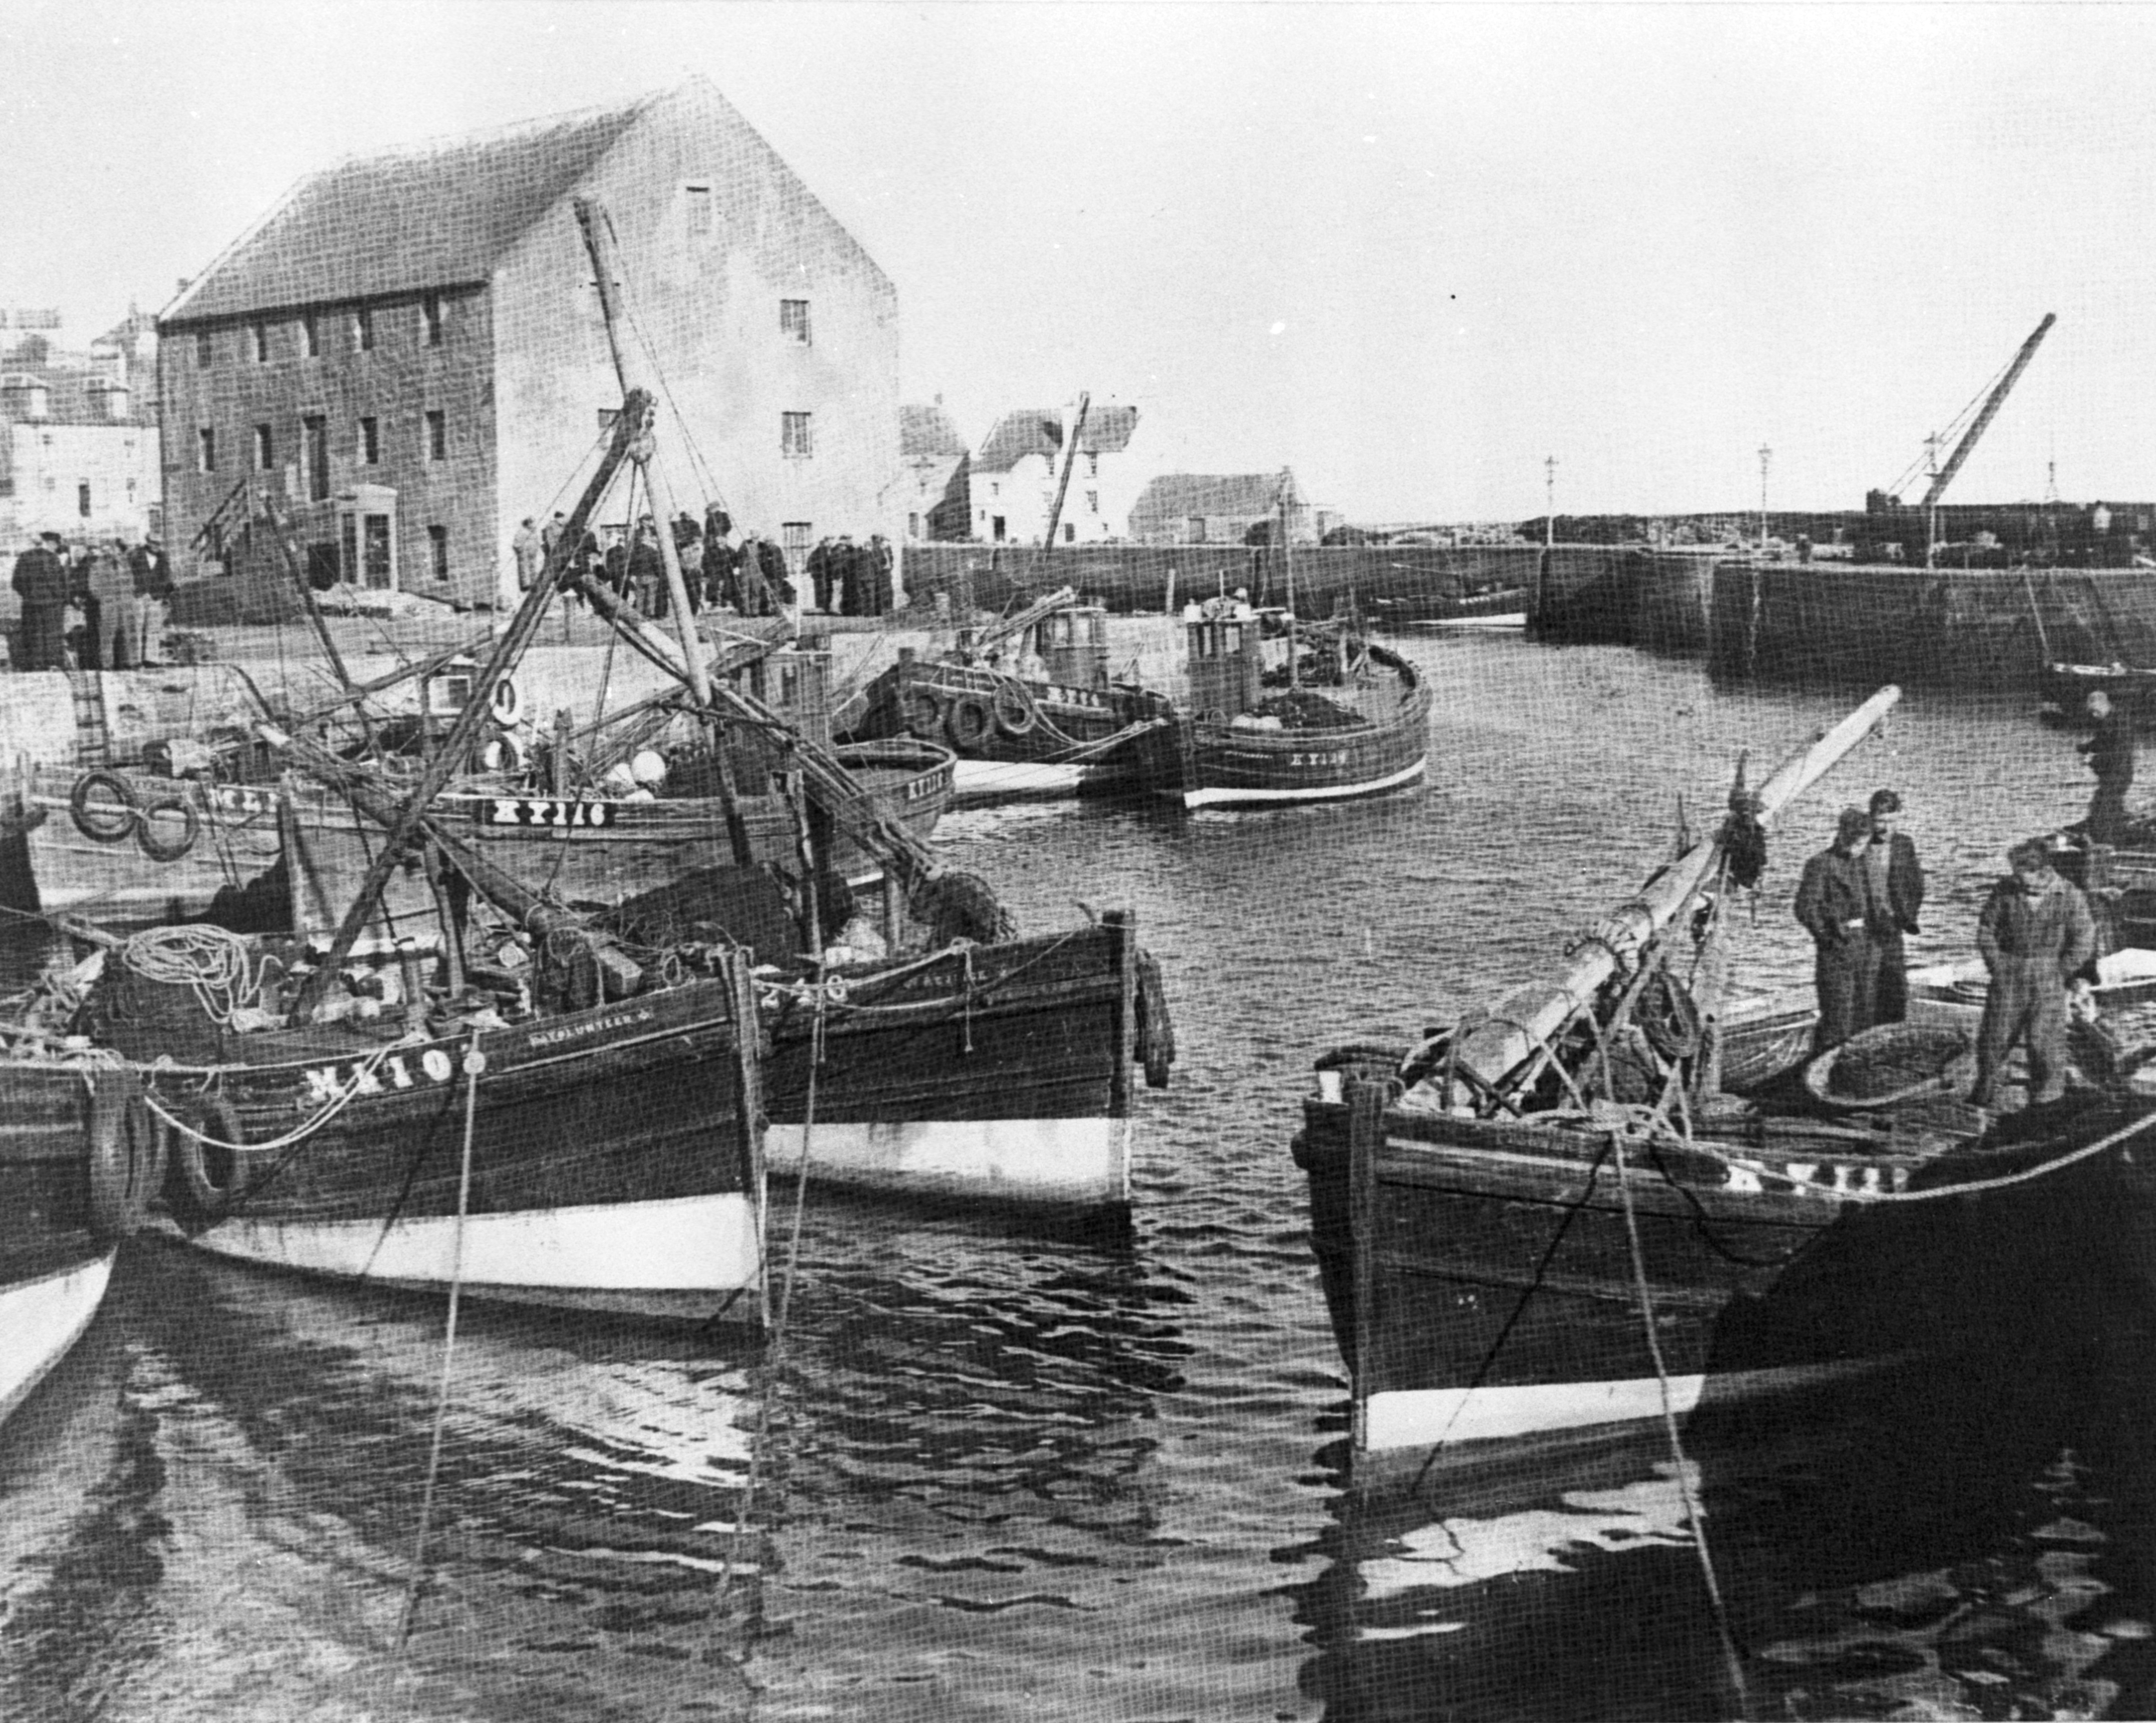 Scottish Fisheries Museum Receives Support for Digital Innovation